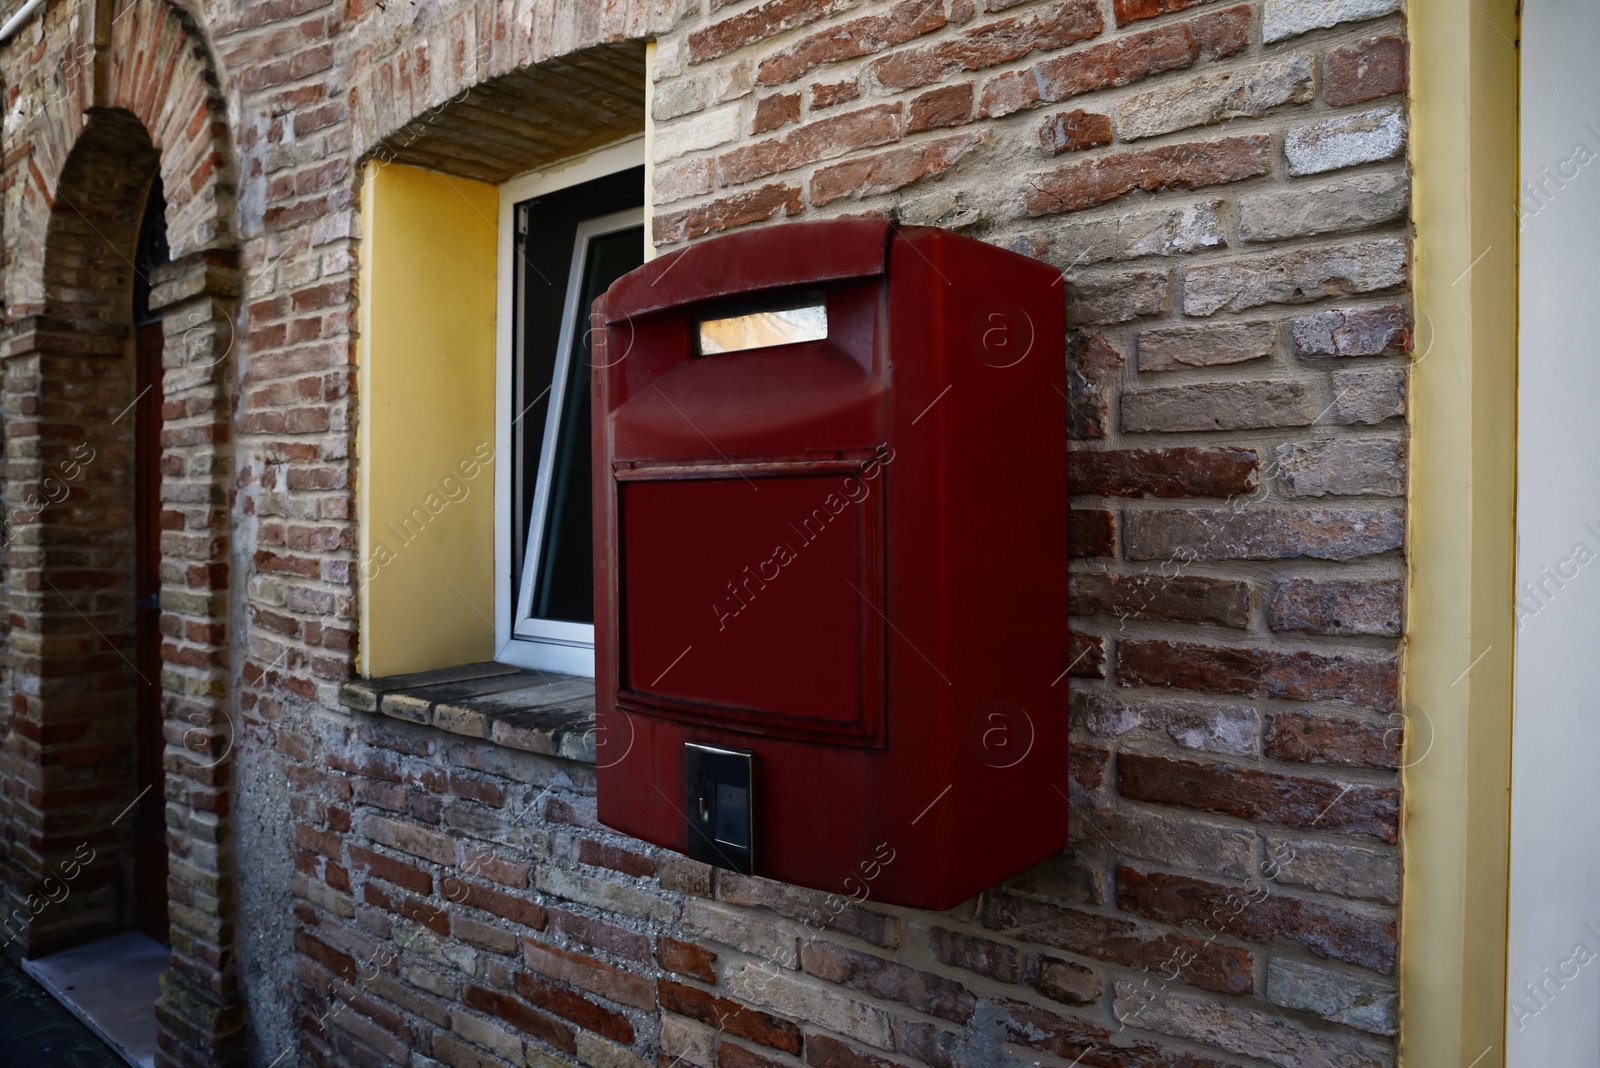 Photo of Red letter box on brick wall of building